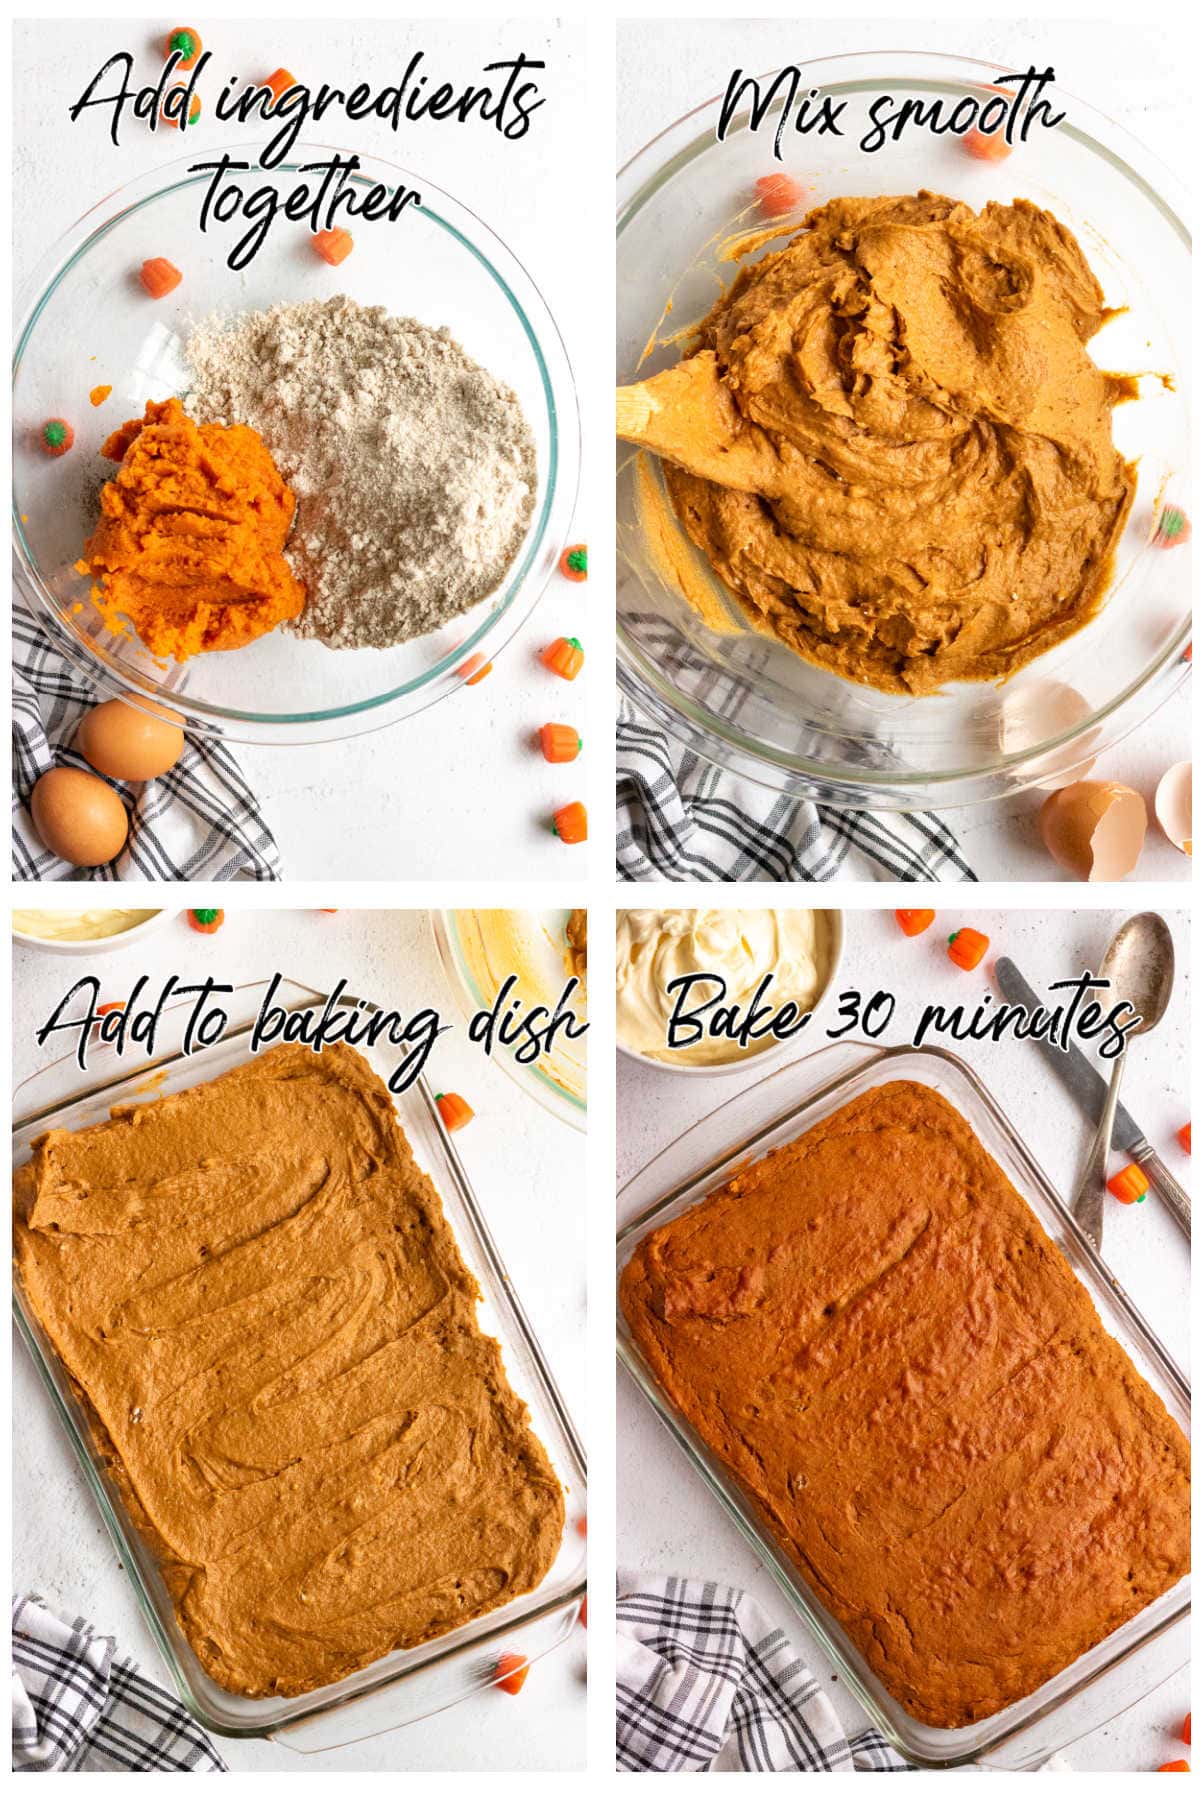 Step by step images showing how to make pumpkin cake.